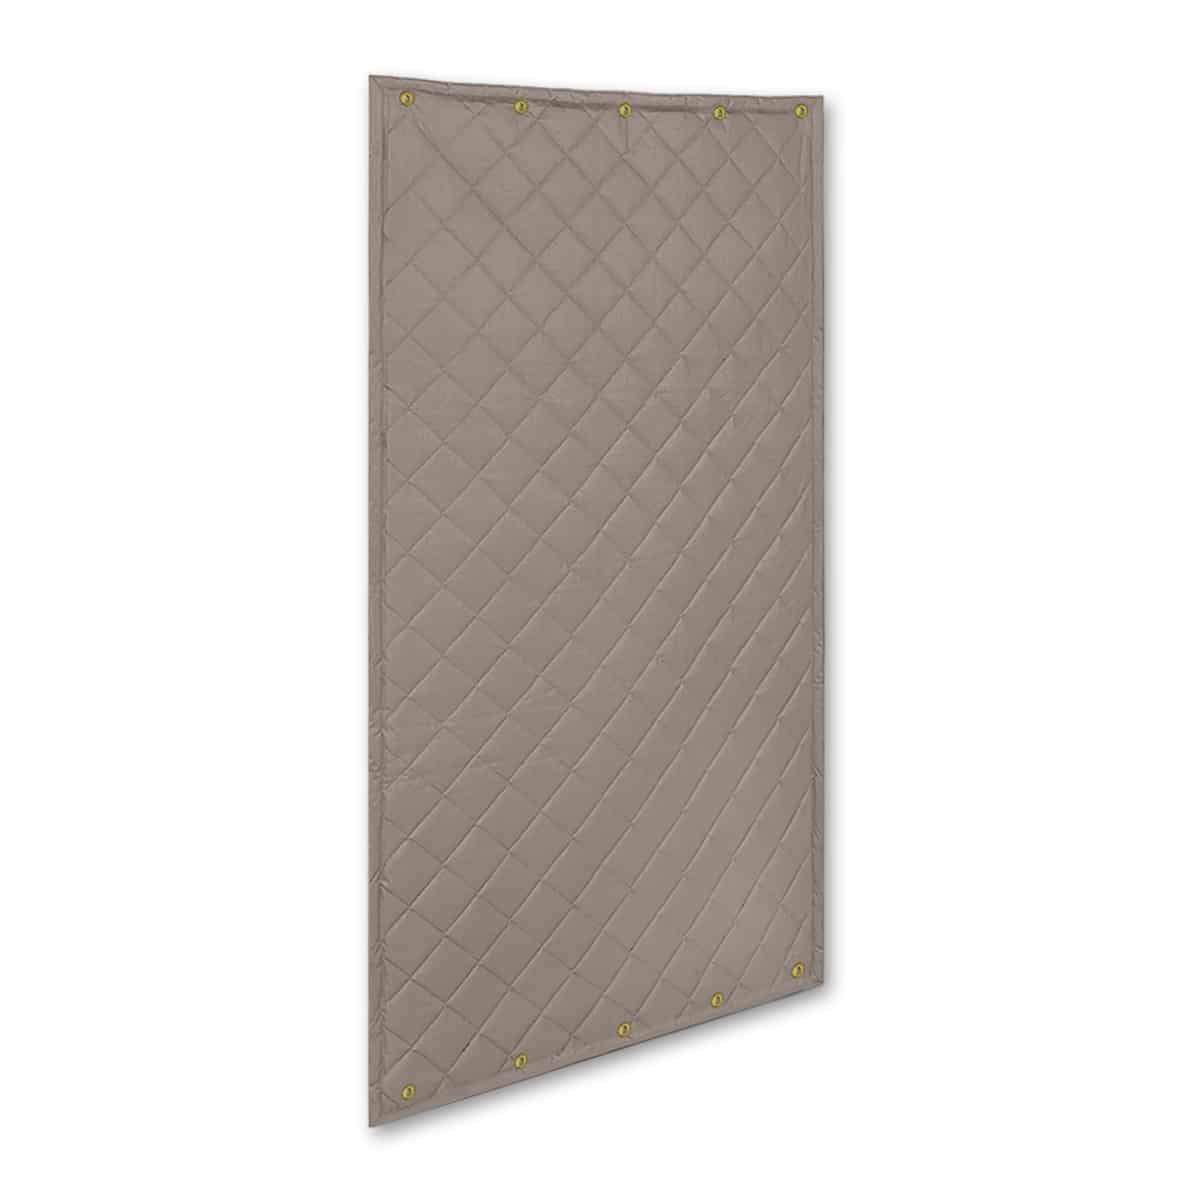 Window Noise Control Blankets (38″x72″) double layer – WNC